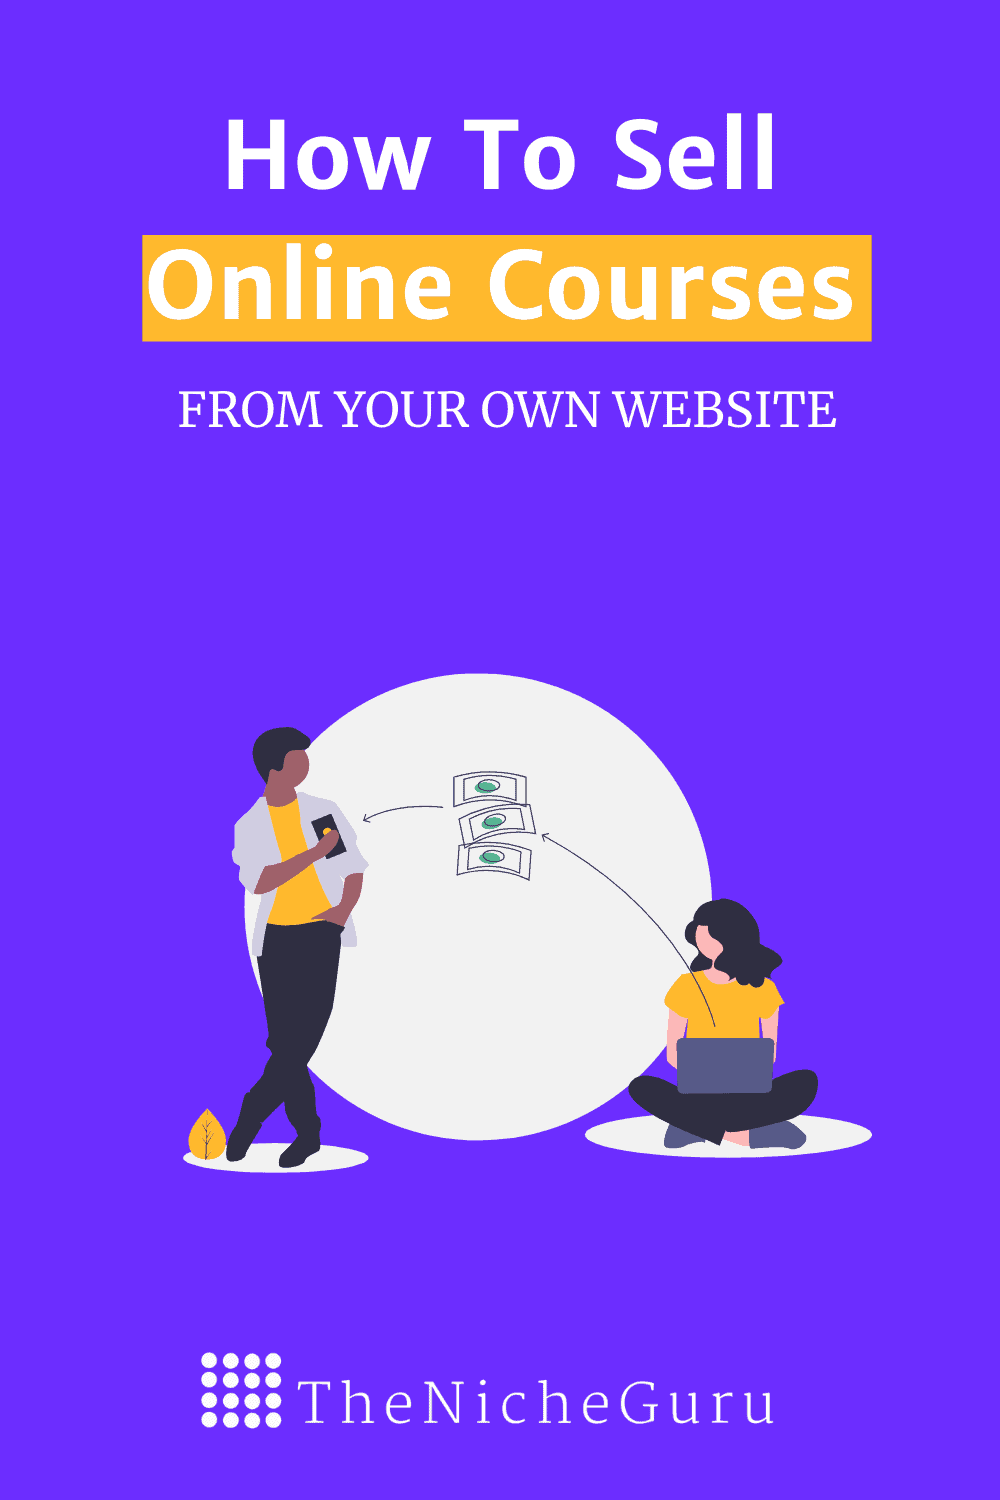 Learn how to easily create and sell online courses from your own website to generate higher revenue. Discover which LMS plugin to use, how to create your course, the best way to promote it, and much more. #OnlineCourse #LMS #Wordpress #Blogging